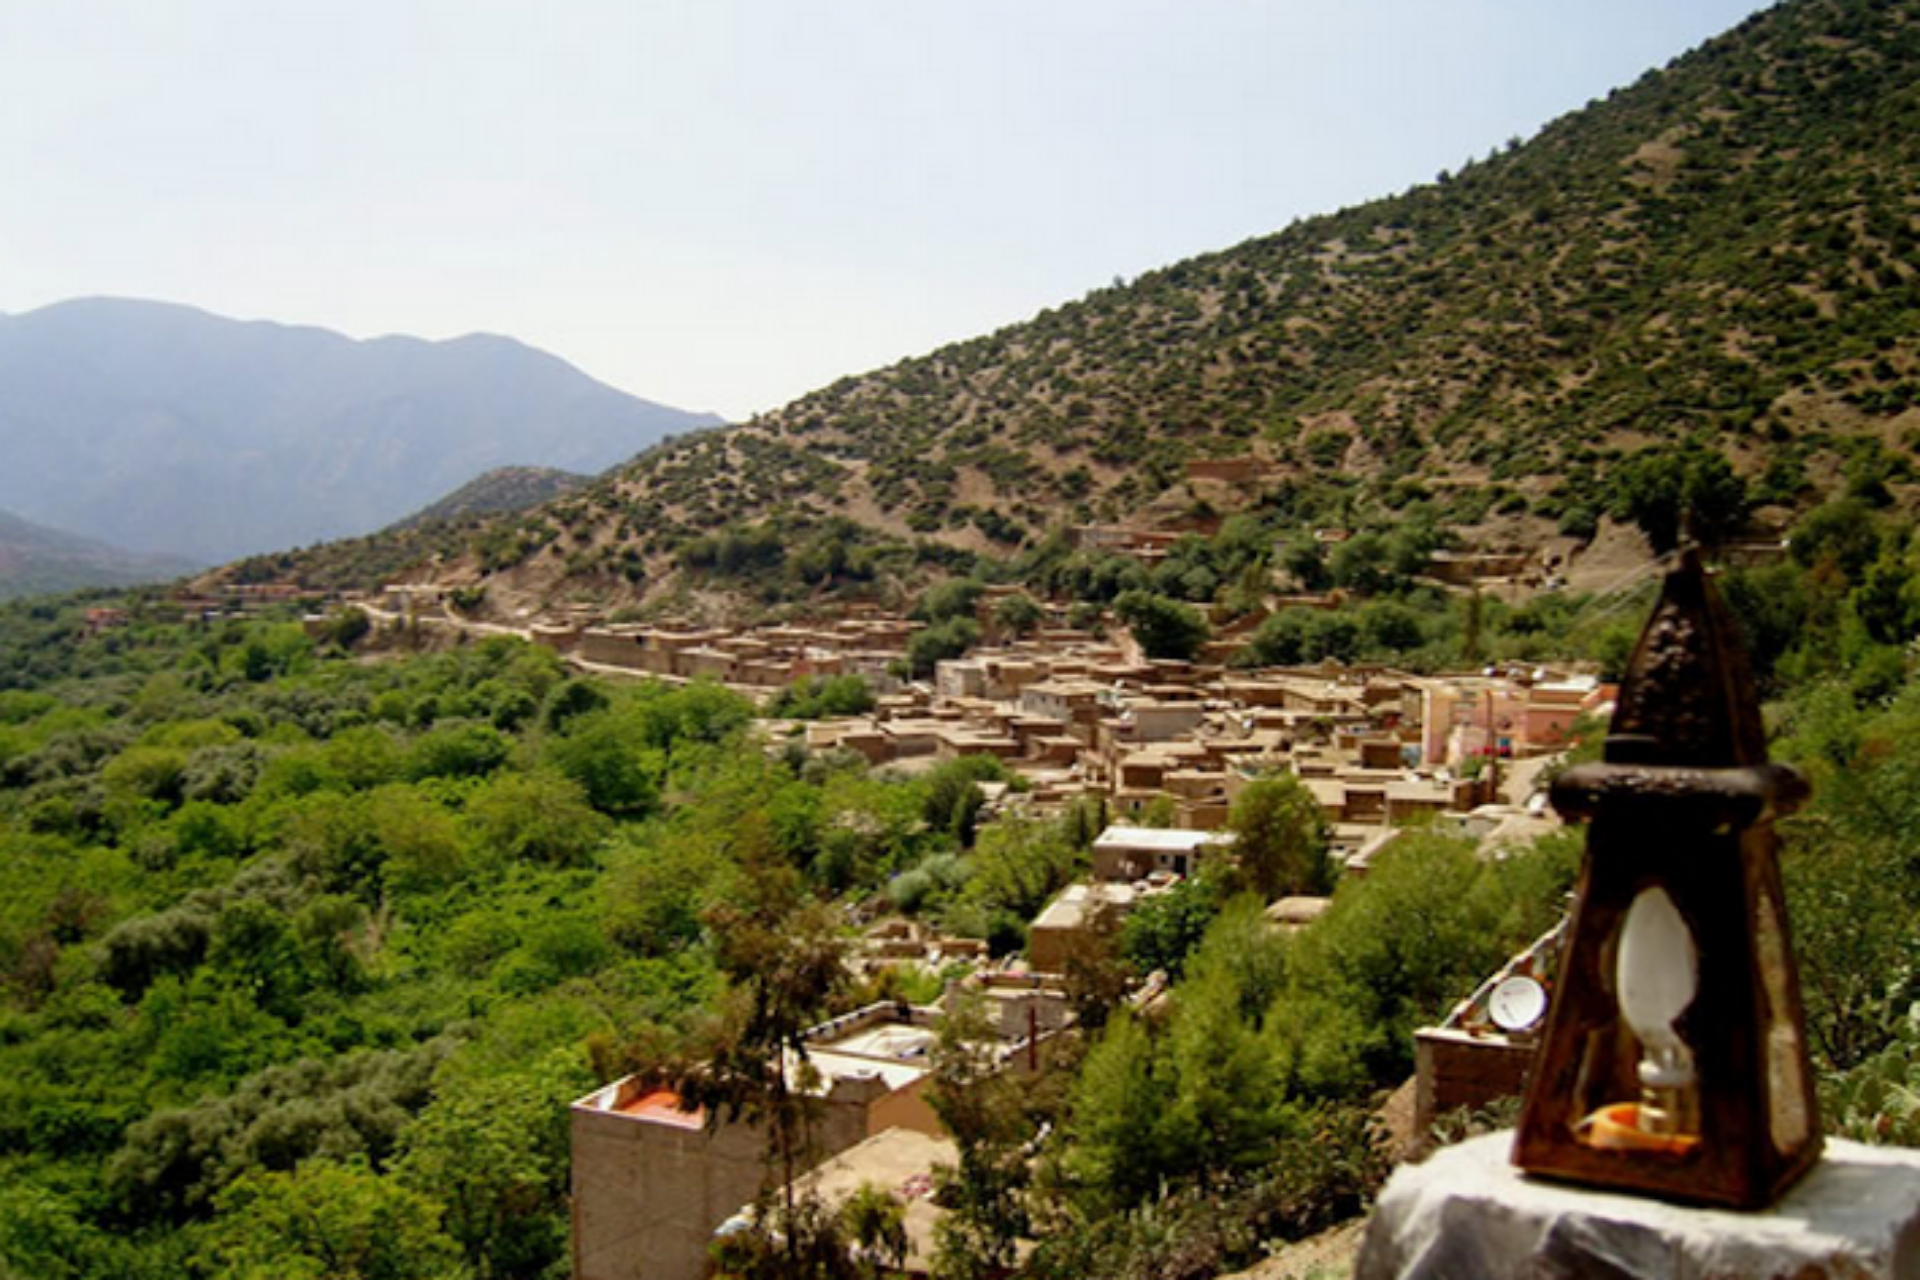 Marrakech to 3 Valleys Full Day Trip